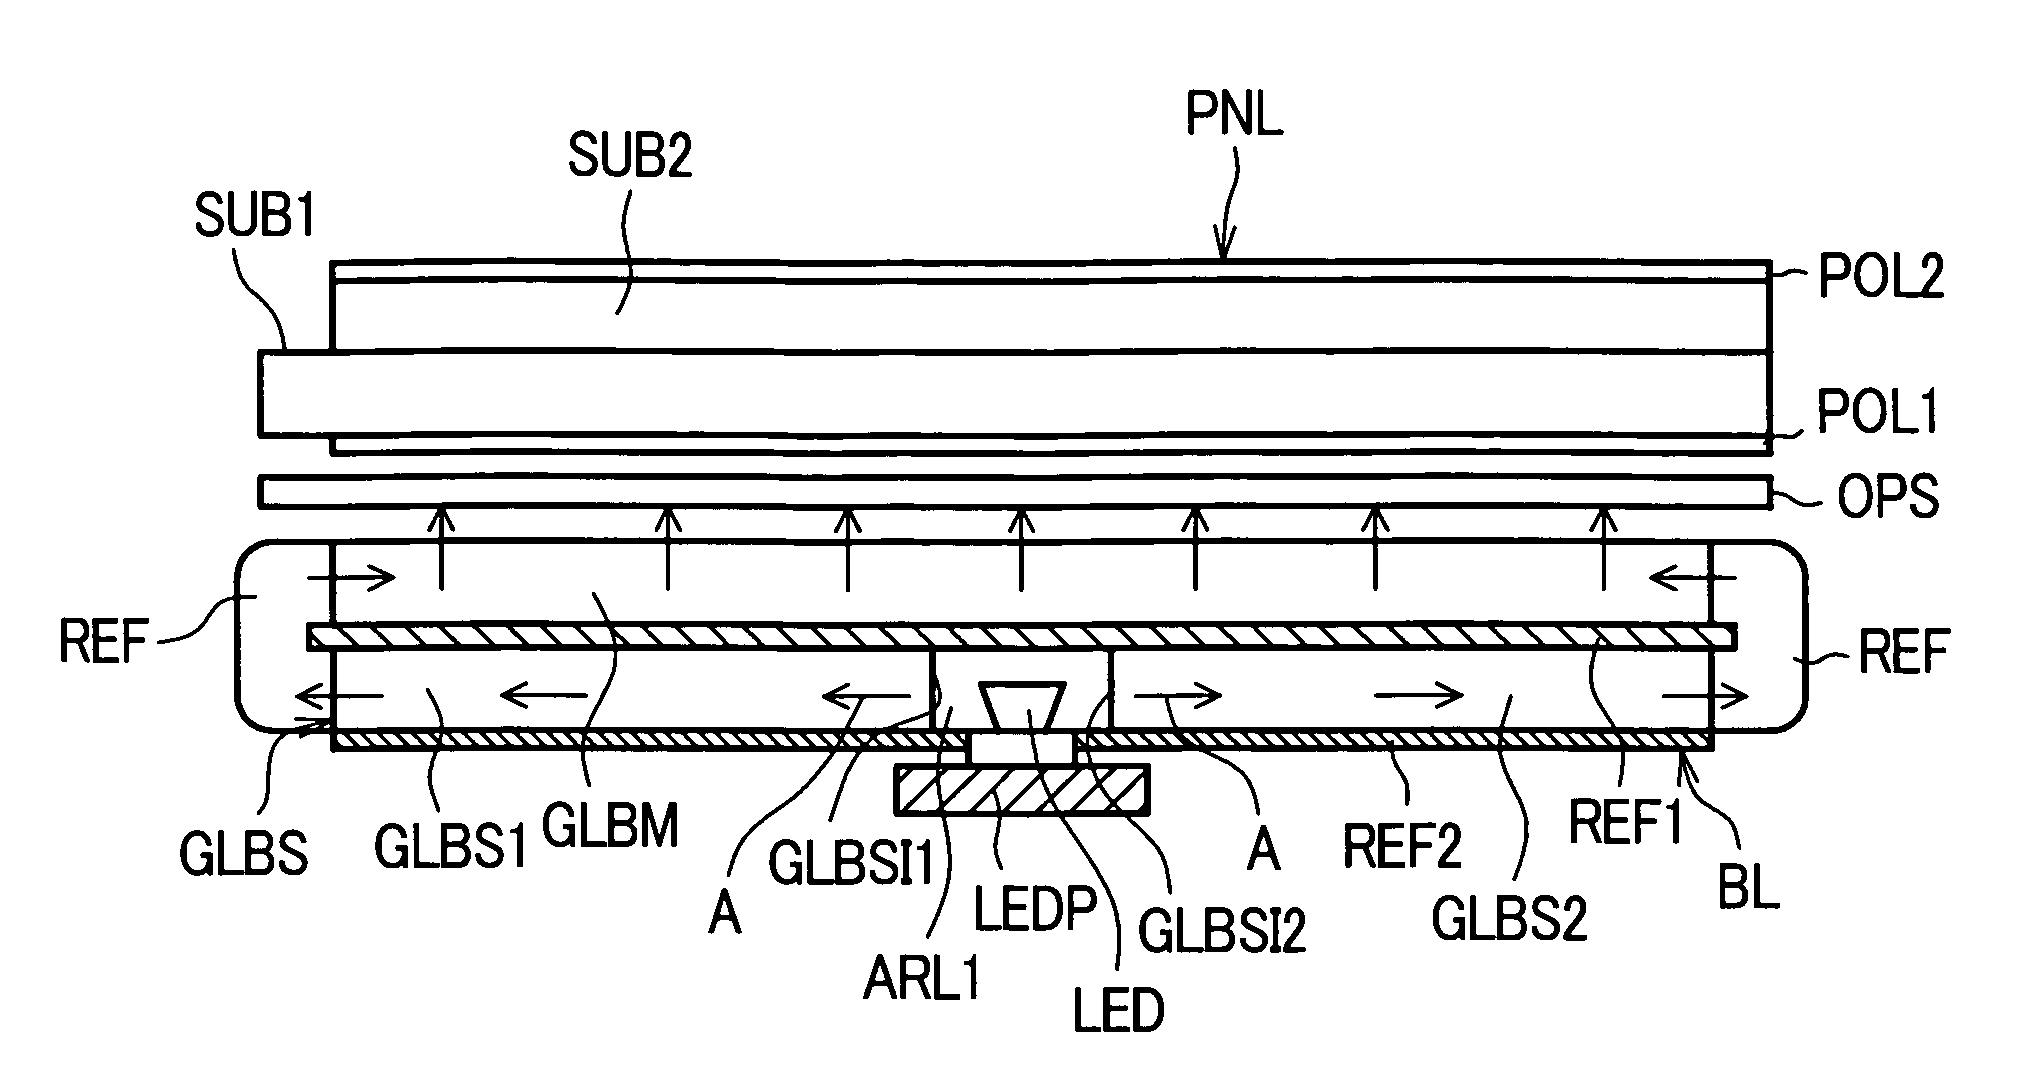 Liquid crystal display device, display device and backlight device